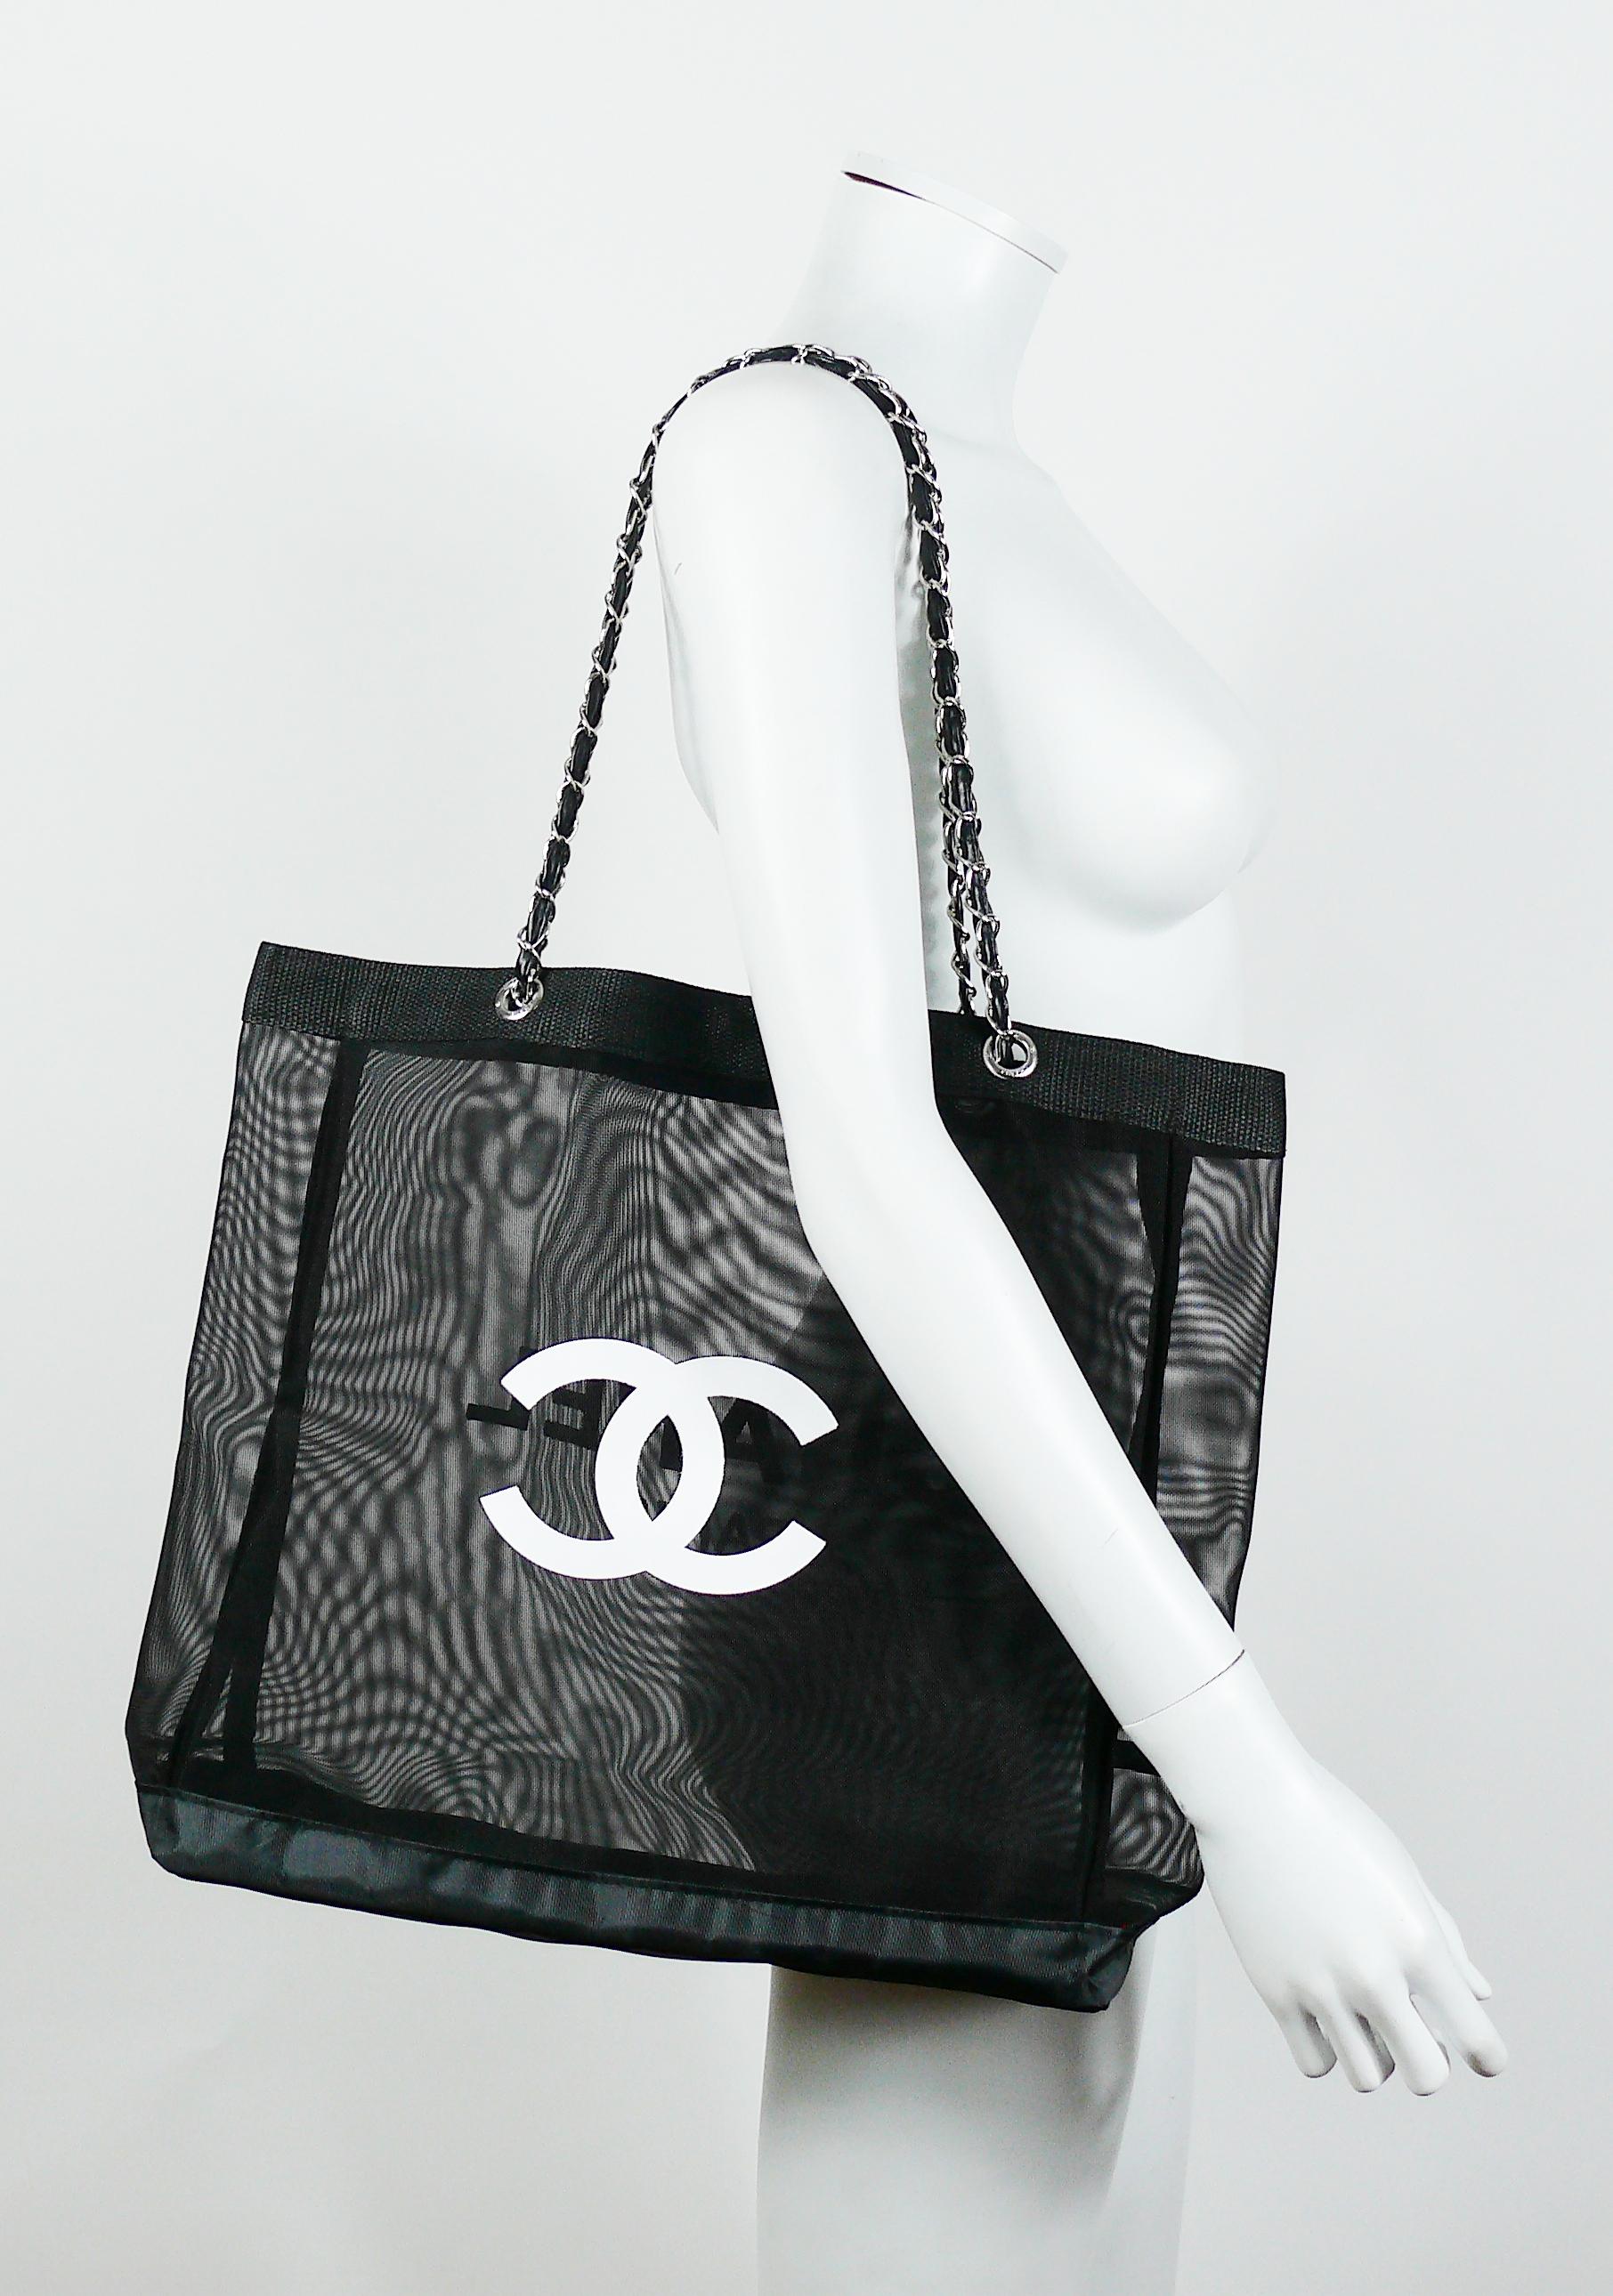 Chanel black mesh tote shopping gift bag.

This bag features :
- Black mesh body with black nylon base and top trim.
- White flocked Chanel Paris on one side and CC logo on the other.
- Silver toned chains with intertwined black faux leather (PVC)